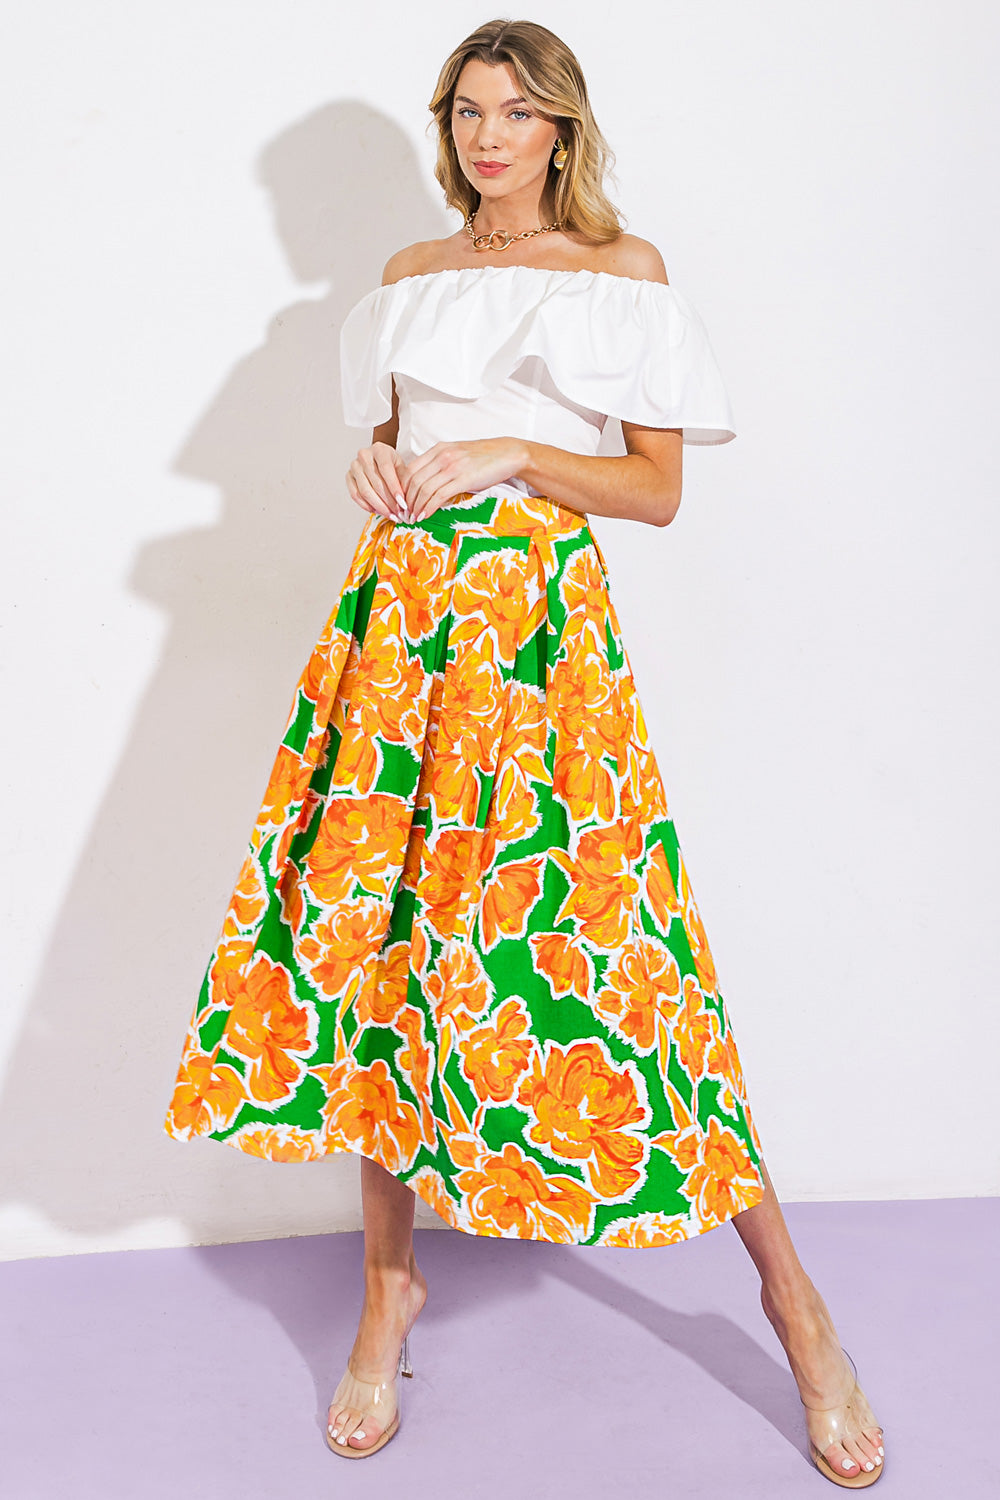 LIVE YOUR TRUTH WOVEN SKIRT